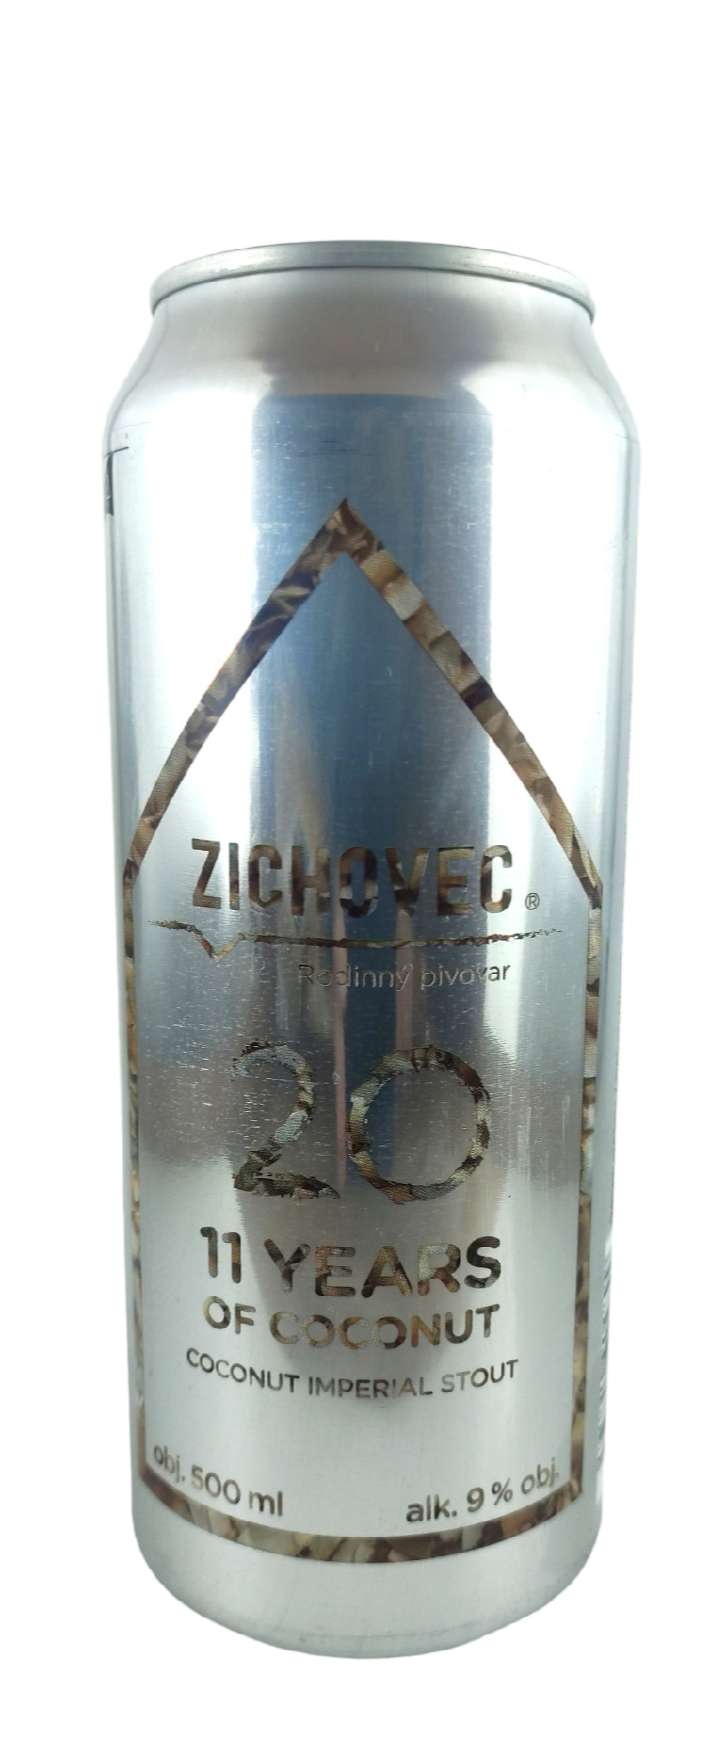 Zichovec 11 Years of Coconut Imperial Stout 20°